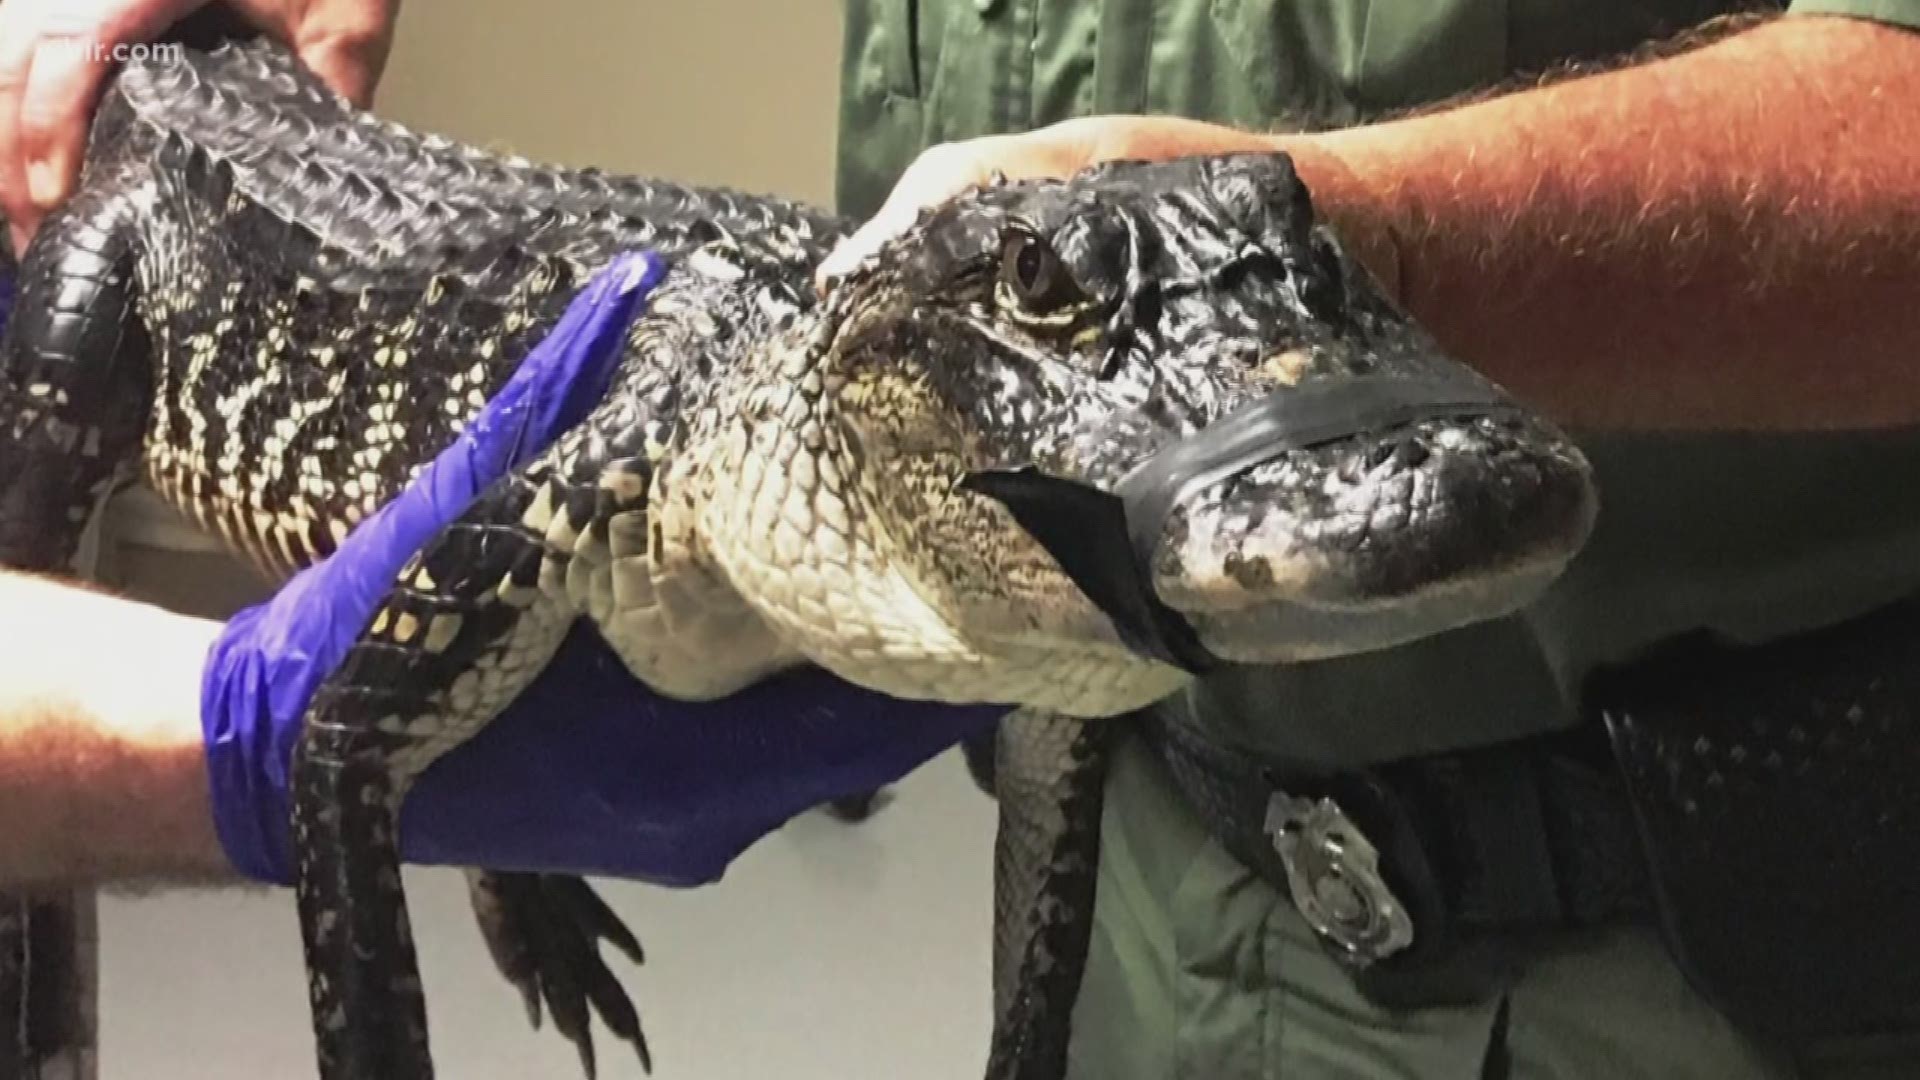 Sep. 19, 2018: The alligator found in a woman's back-yard in Monroe County is now safely residing at its new home at the Chattanooga Zoo.